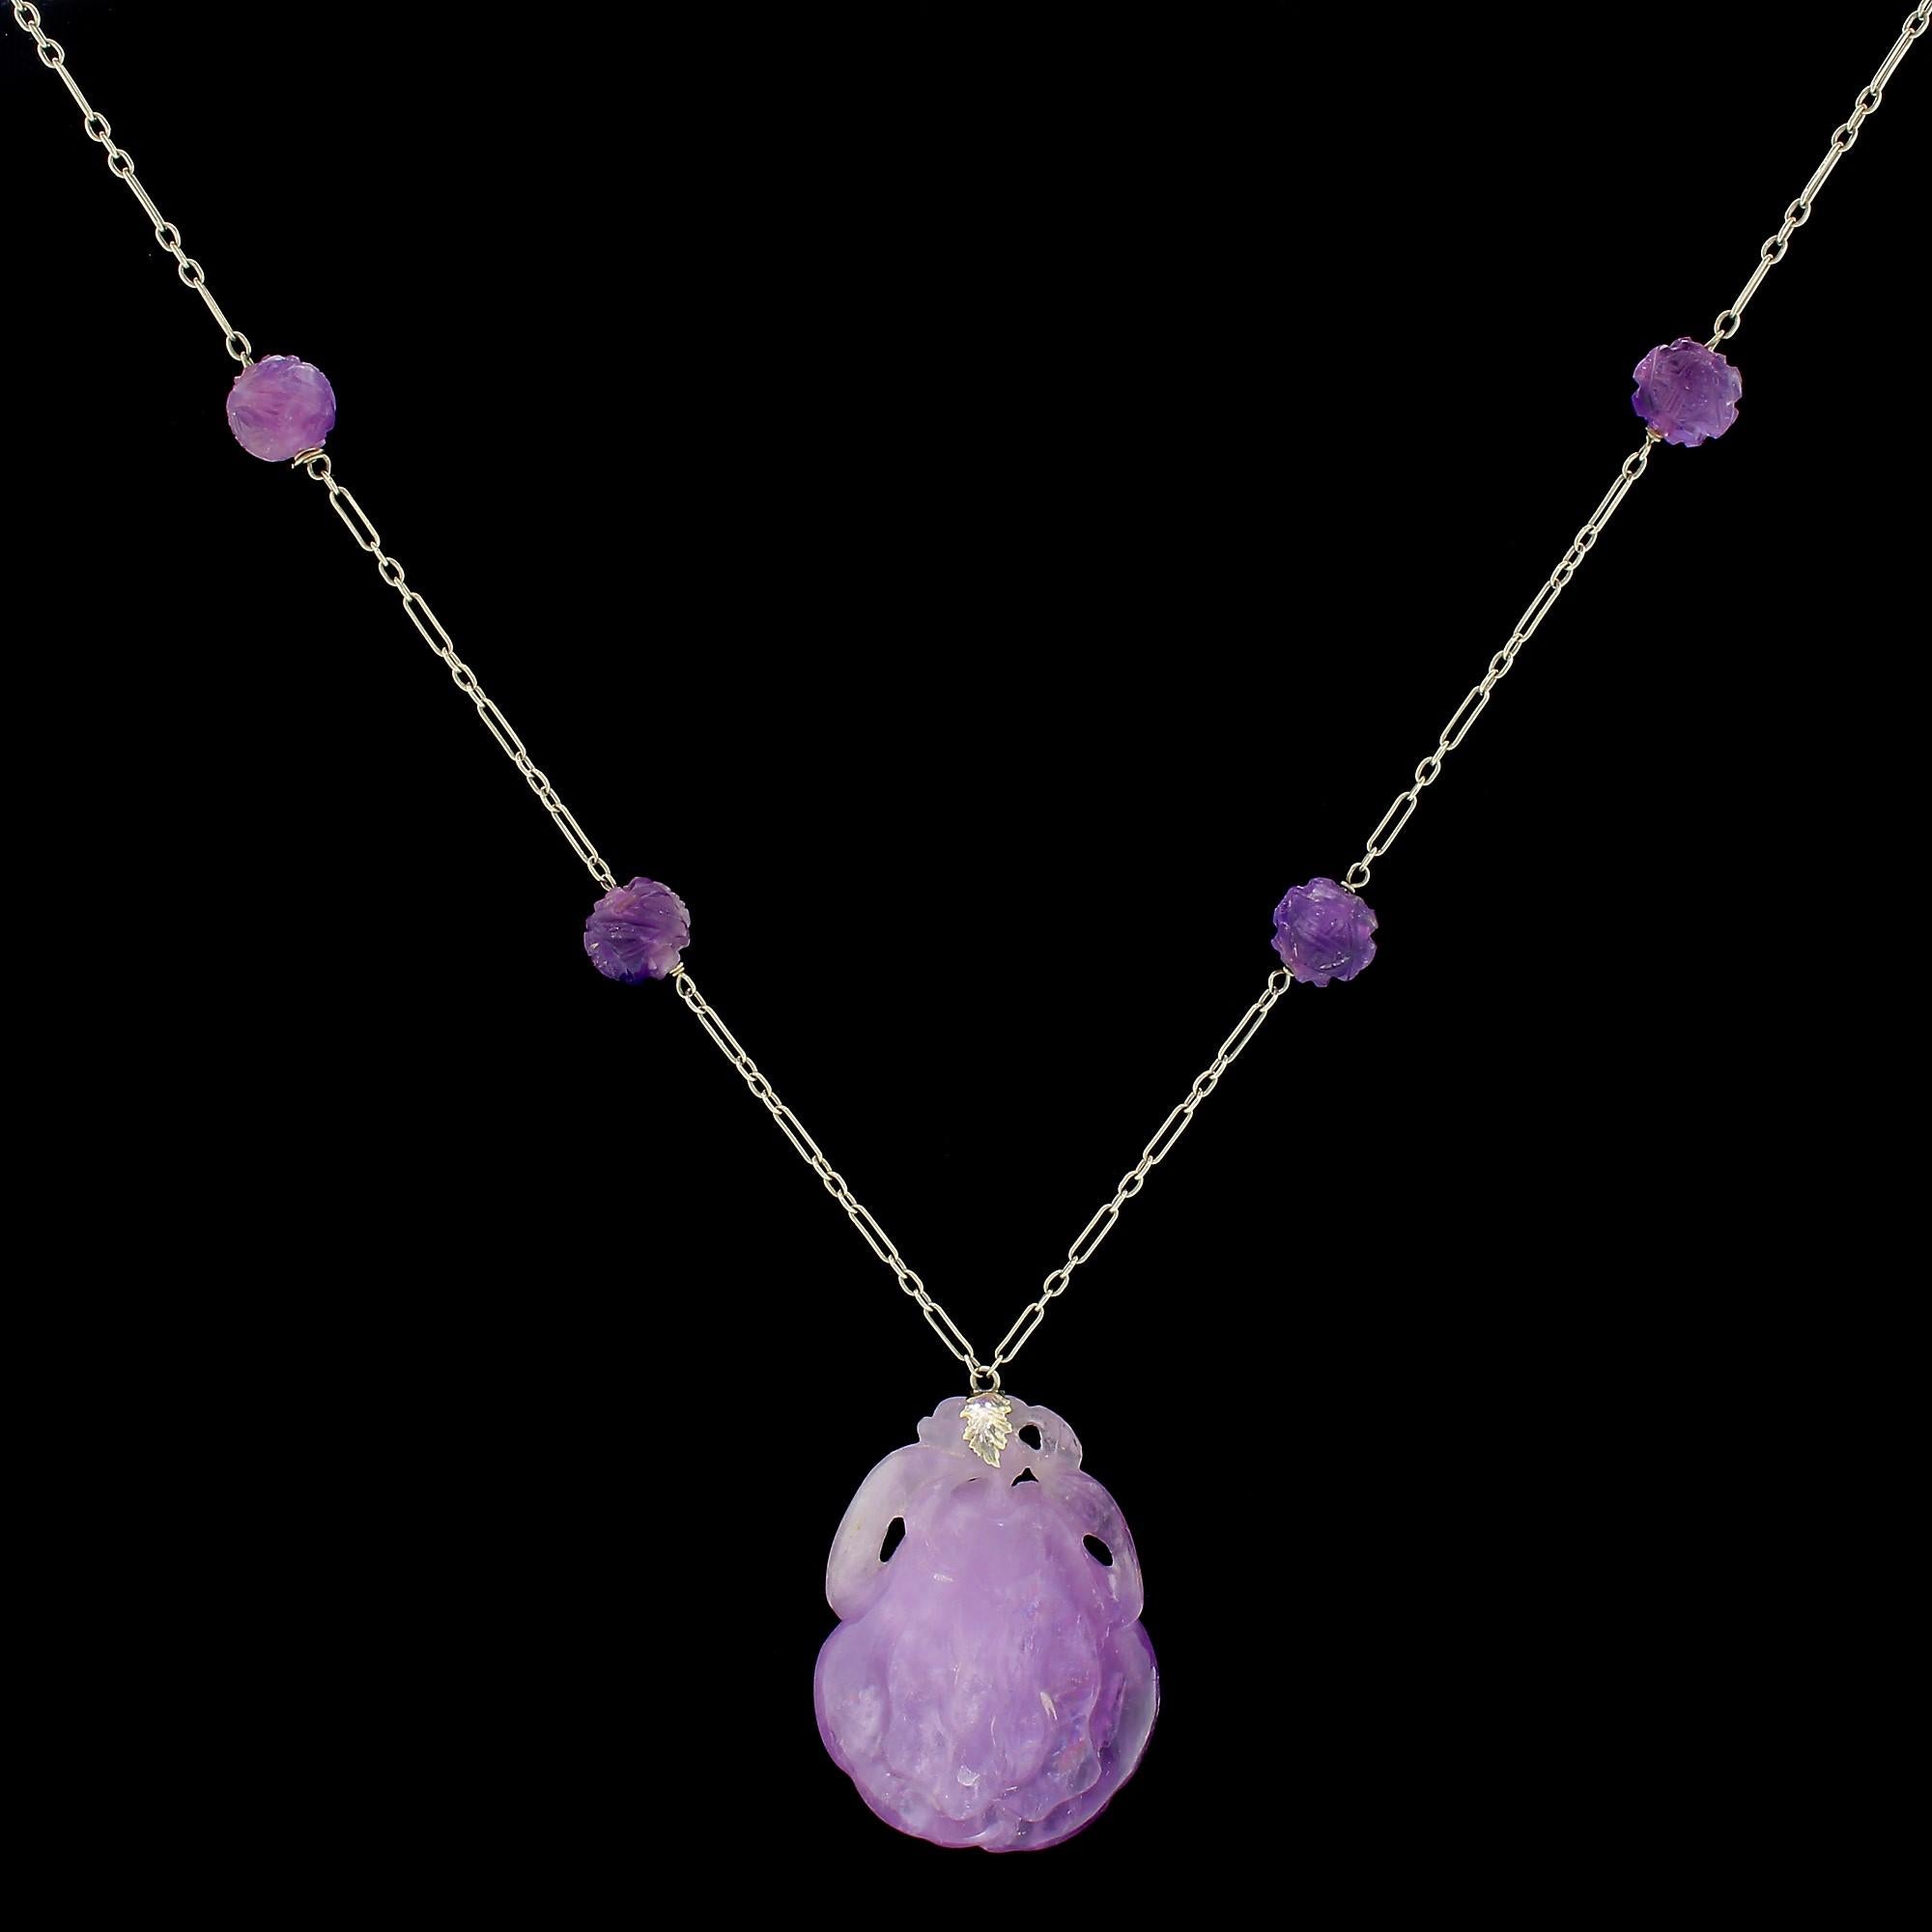 Finding early Chinese Export pieces is quite difficult due to the fact there are so many modern copies. We are thrilled to present this authentic and beautiful necklace, crafted from hand-carved amethyst stones and 14K white gold, all with